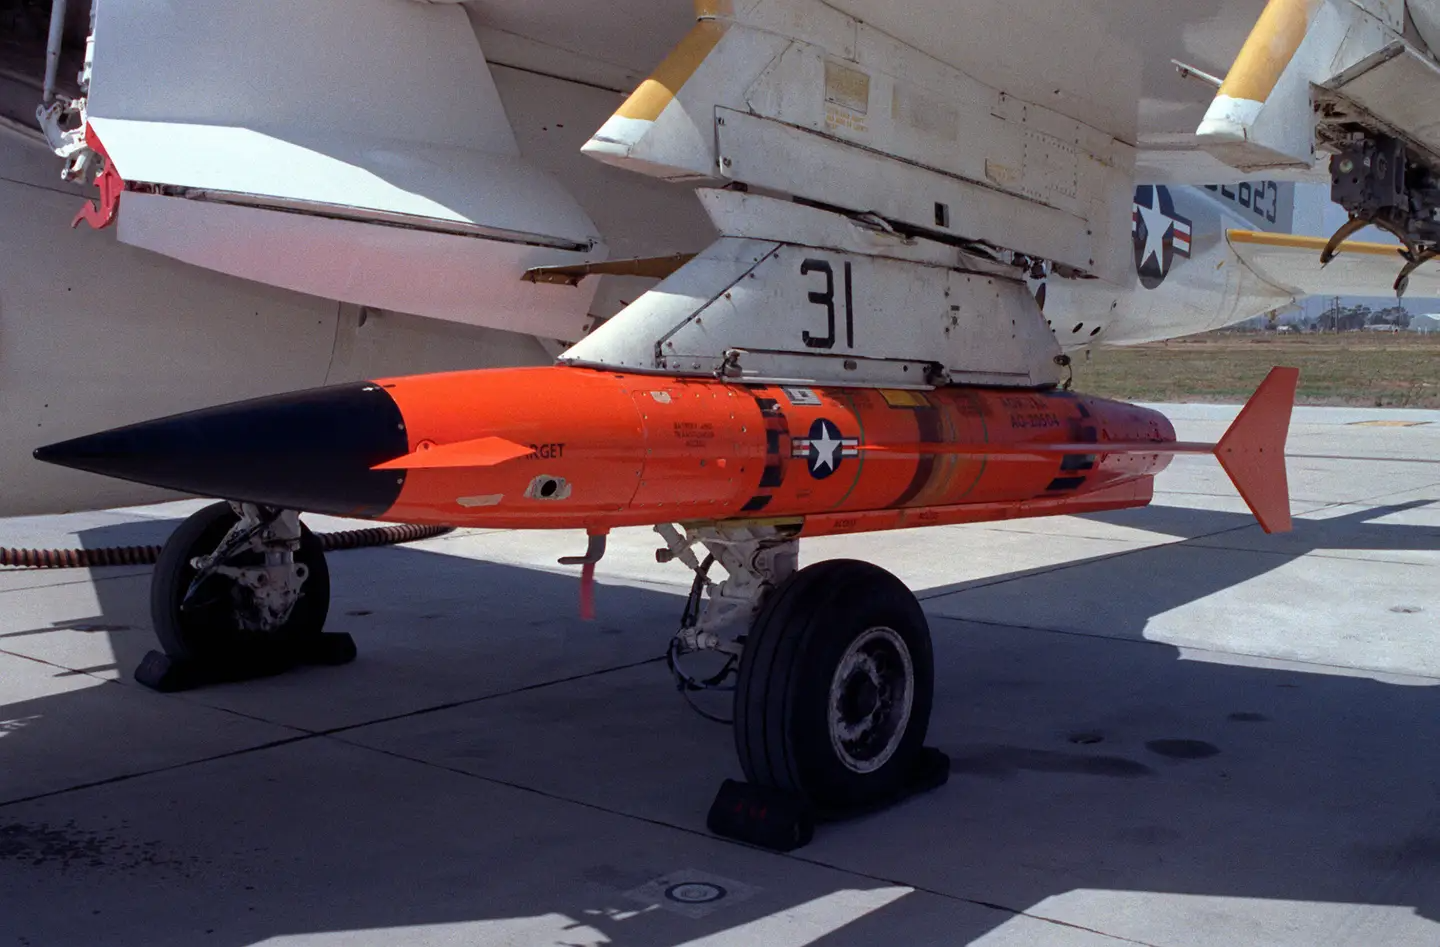 A view of an AQM-37A target after it is loaded onto the wing of an A-6E Intruder aircraft at the Pacific Missile Test Center.&nbsp;<em>Credit: U.S. Navy</em>